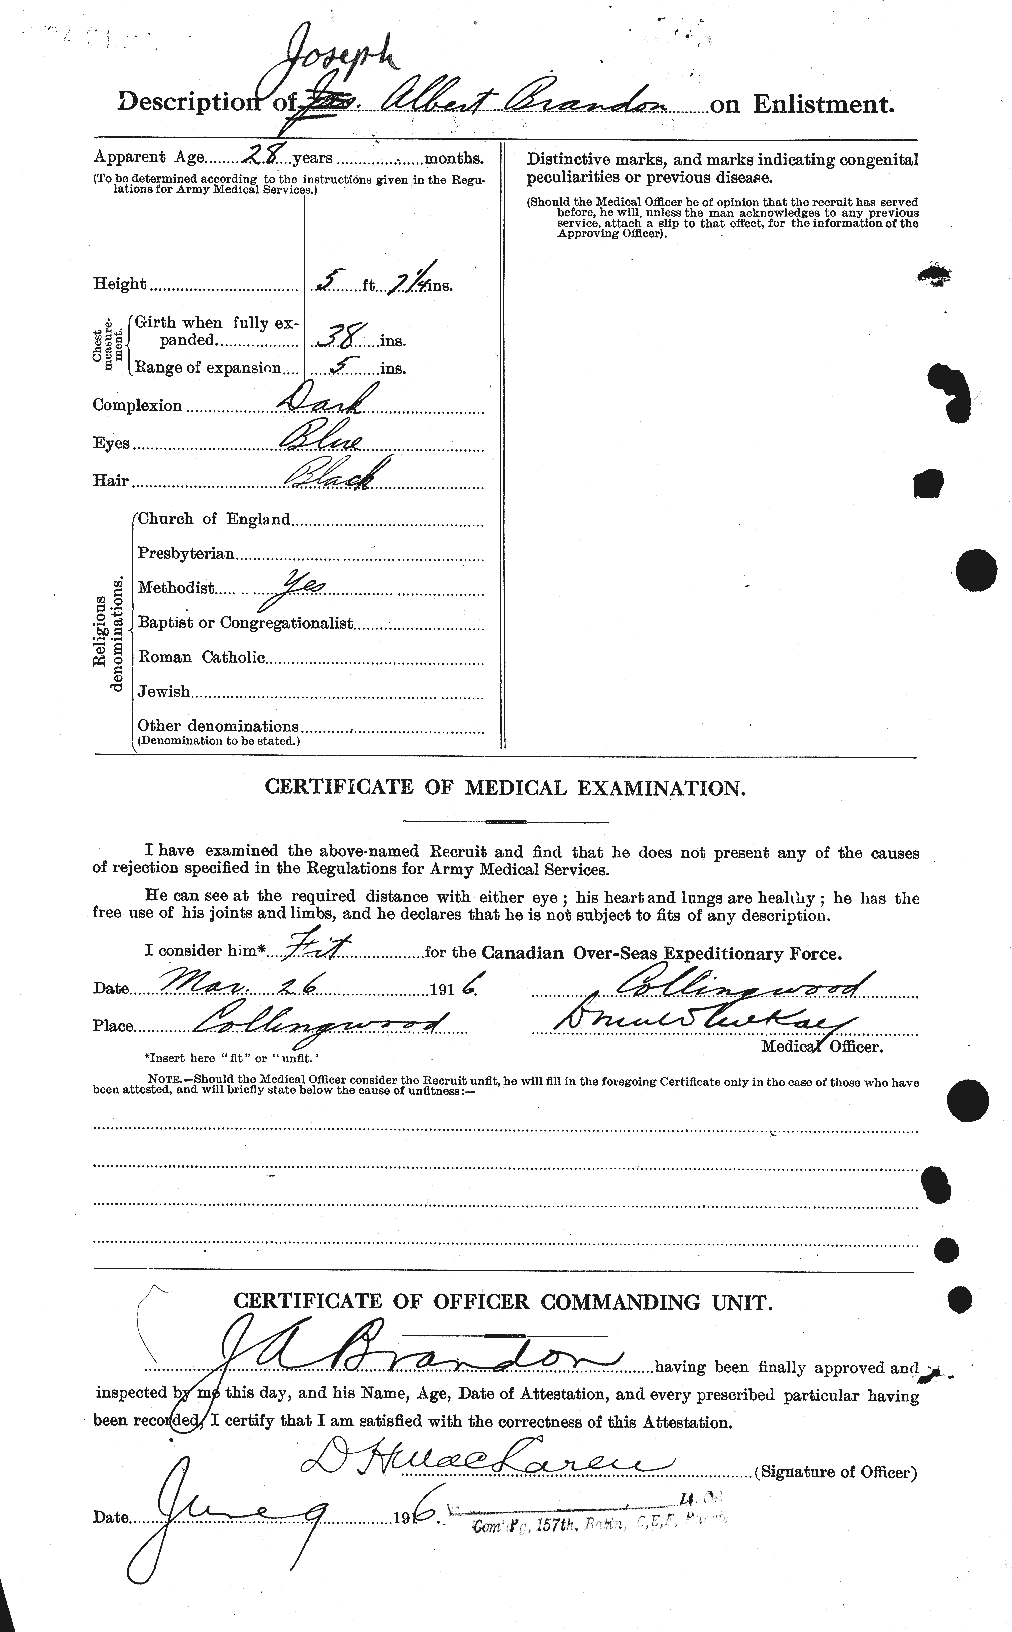 Personnel Records of the First World War - CEF 257675b